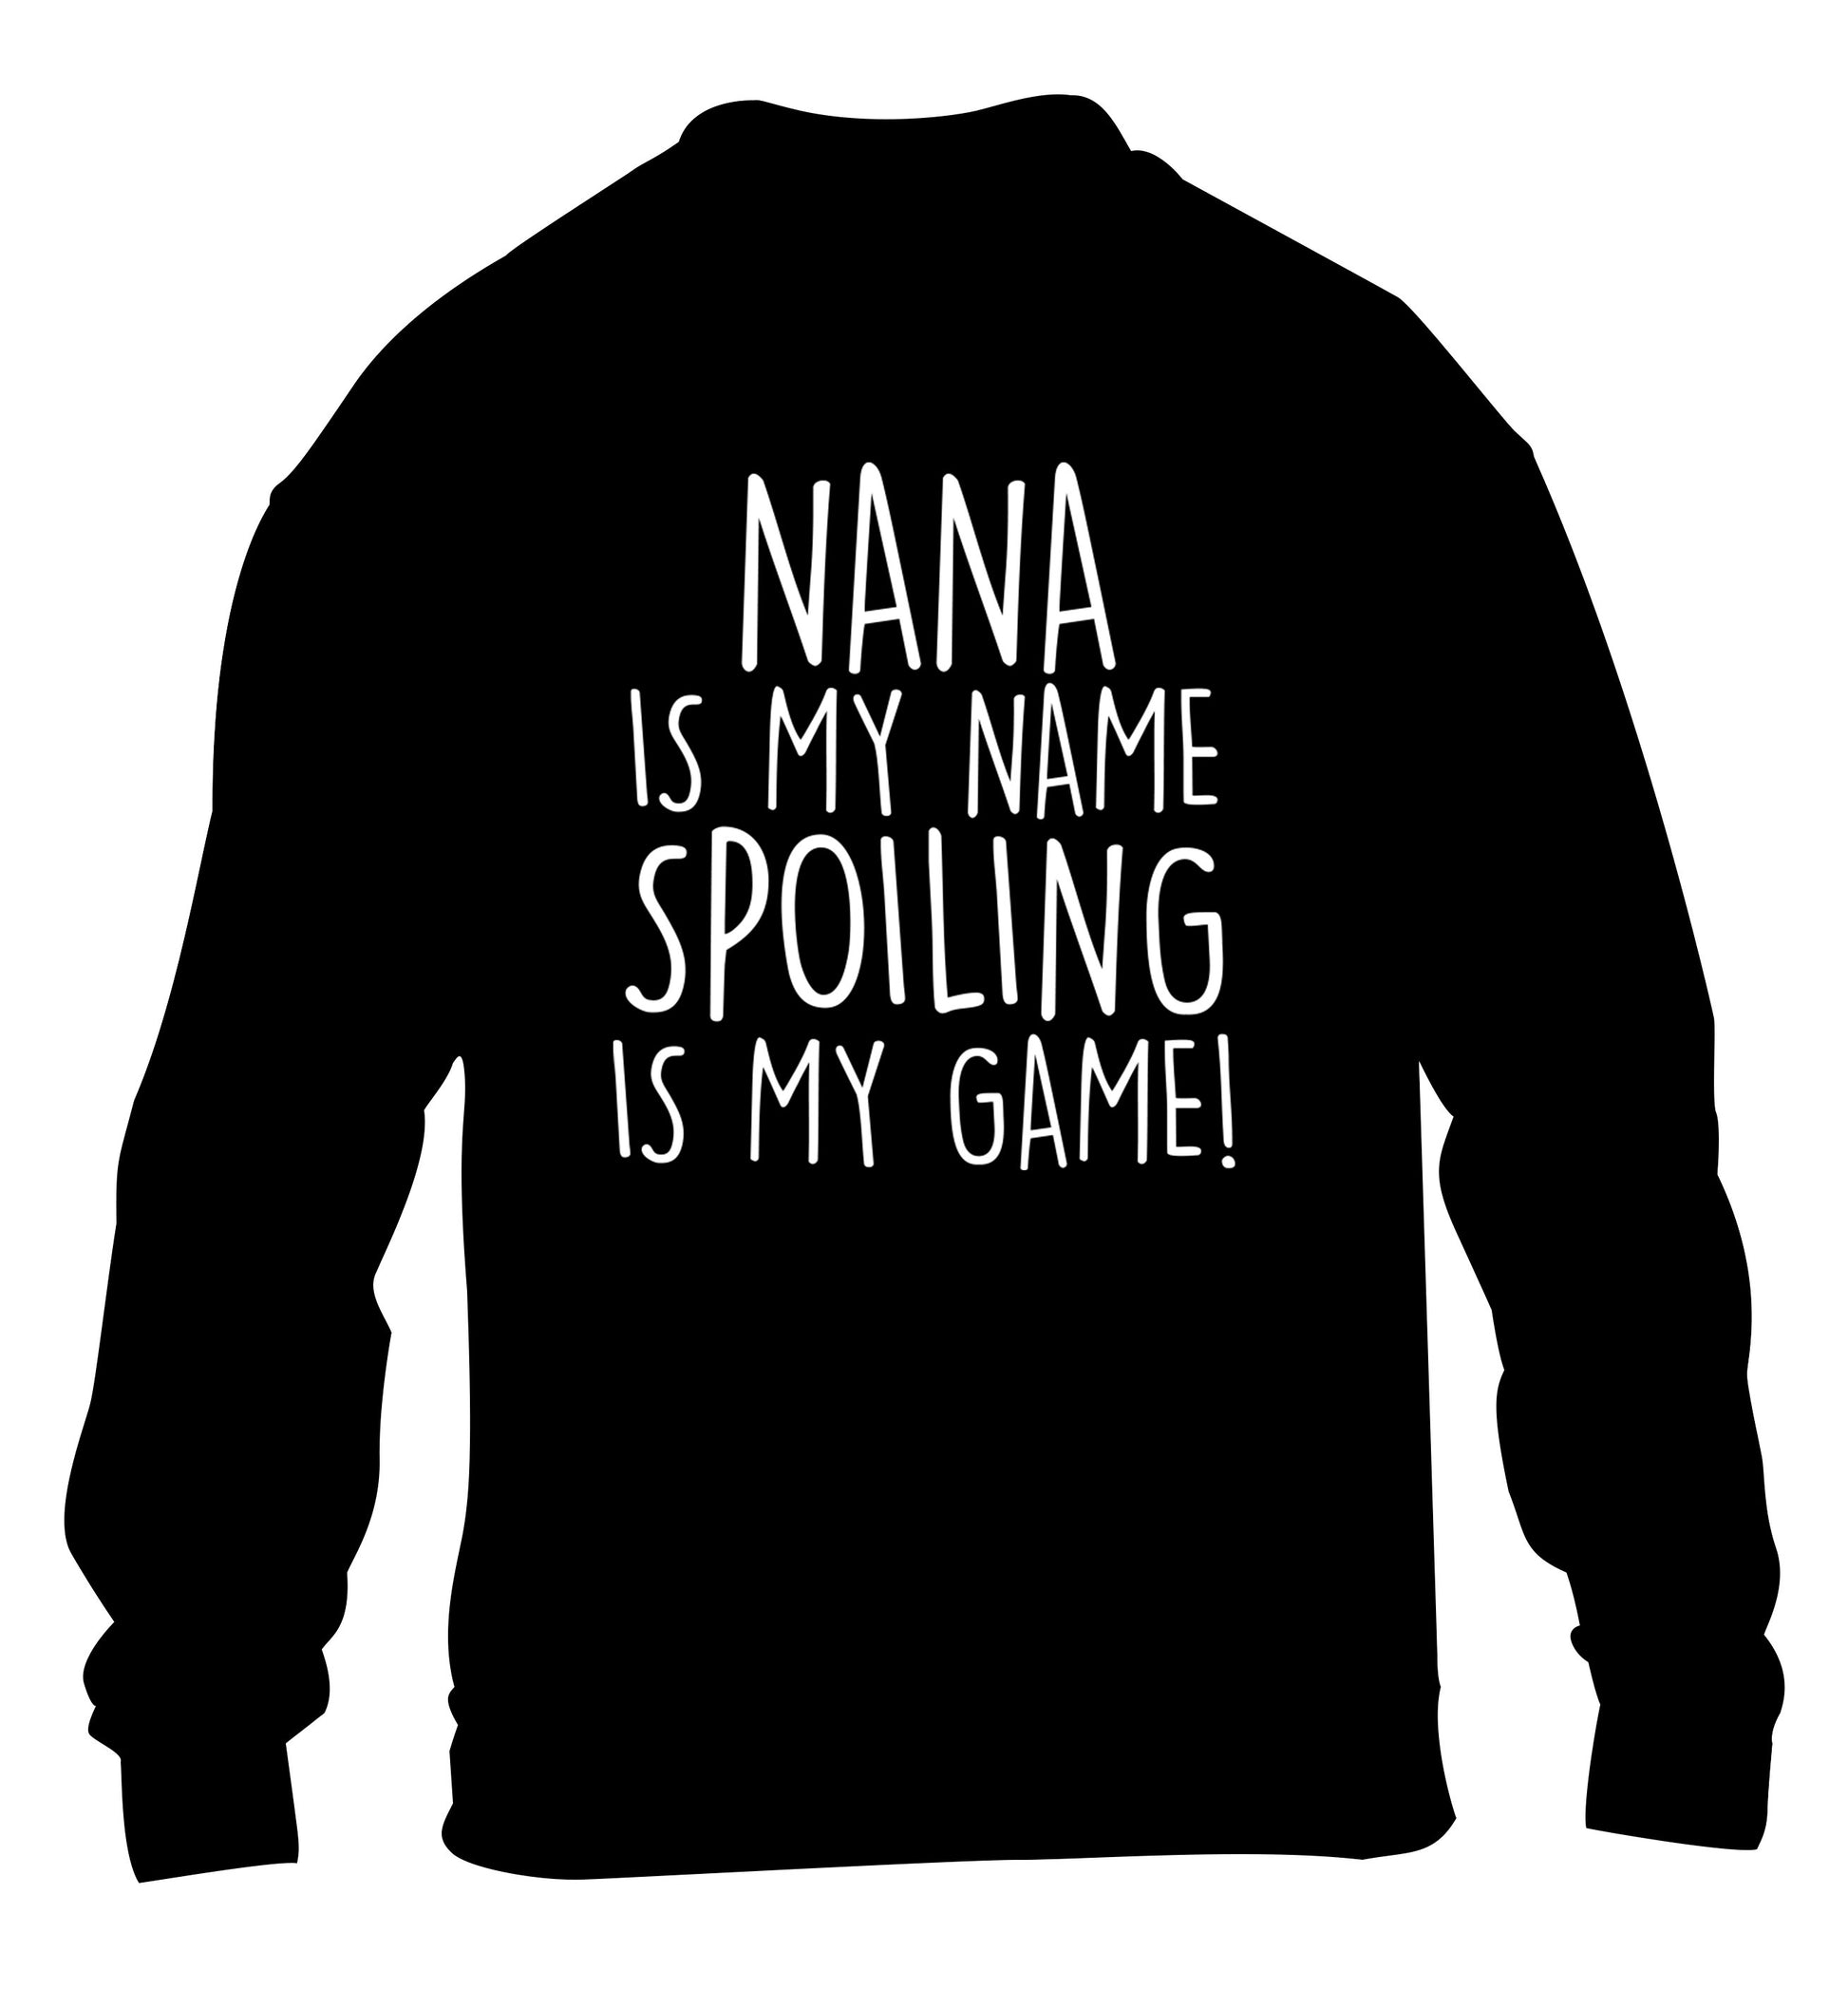 Nana is my name, spoiling is my game children's black sweater 12-14 Years